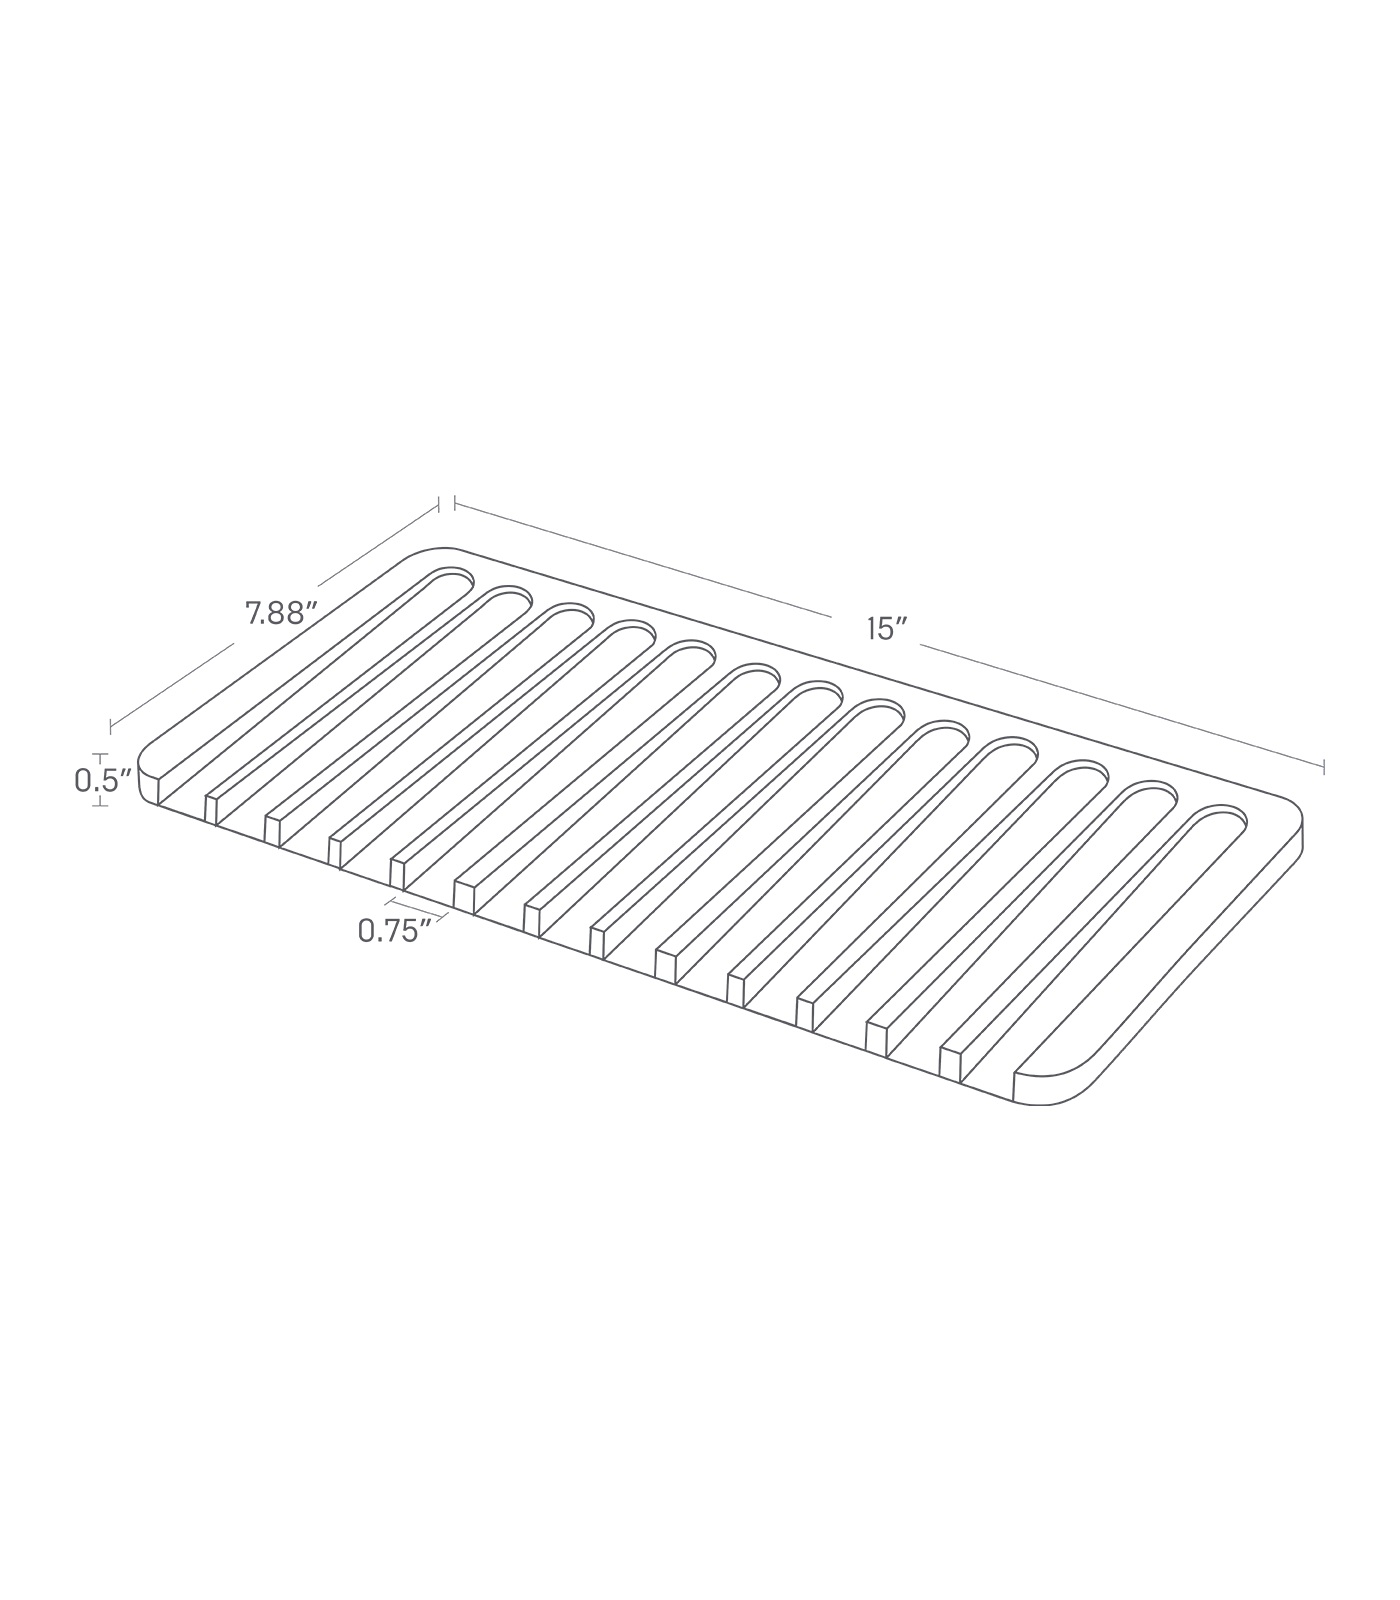 FLOW Dish Drainer Tray. 15 inches long, 7.88 inches wide, 0.5 inches tall.